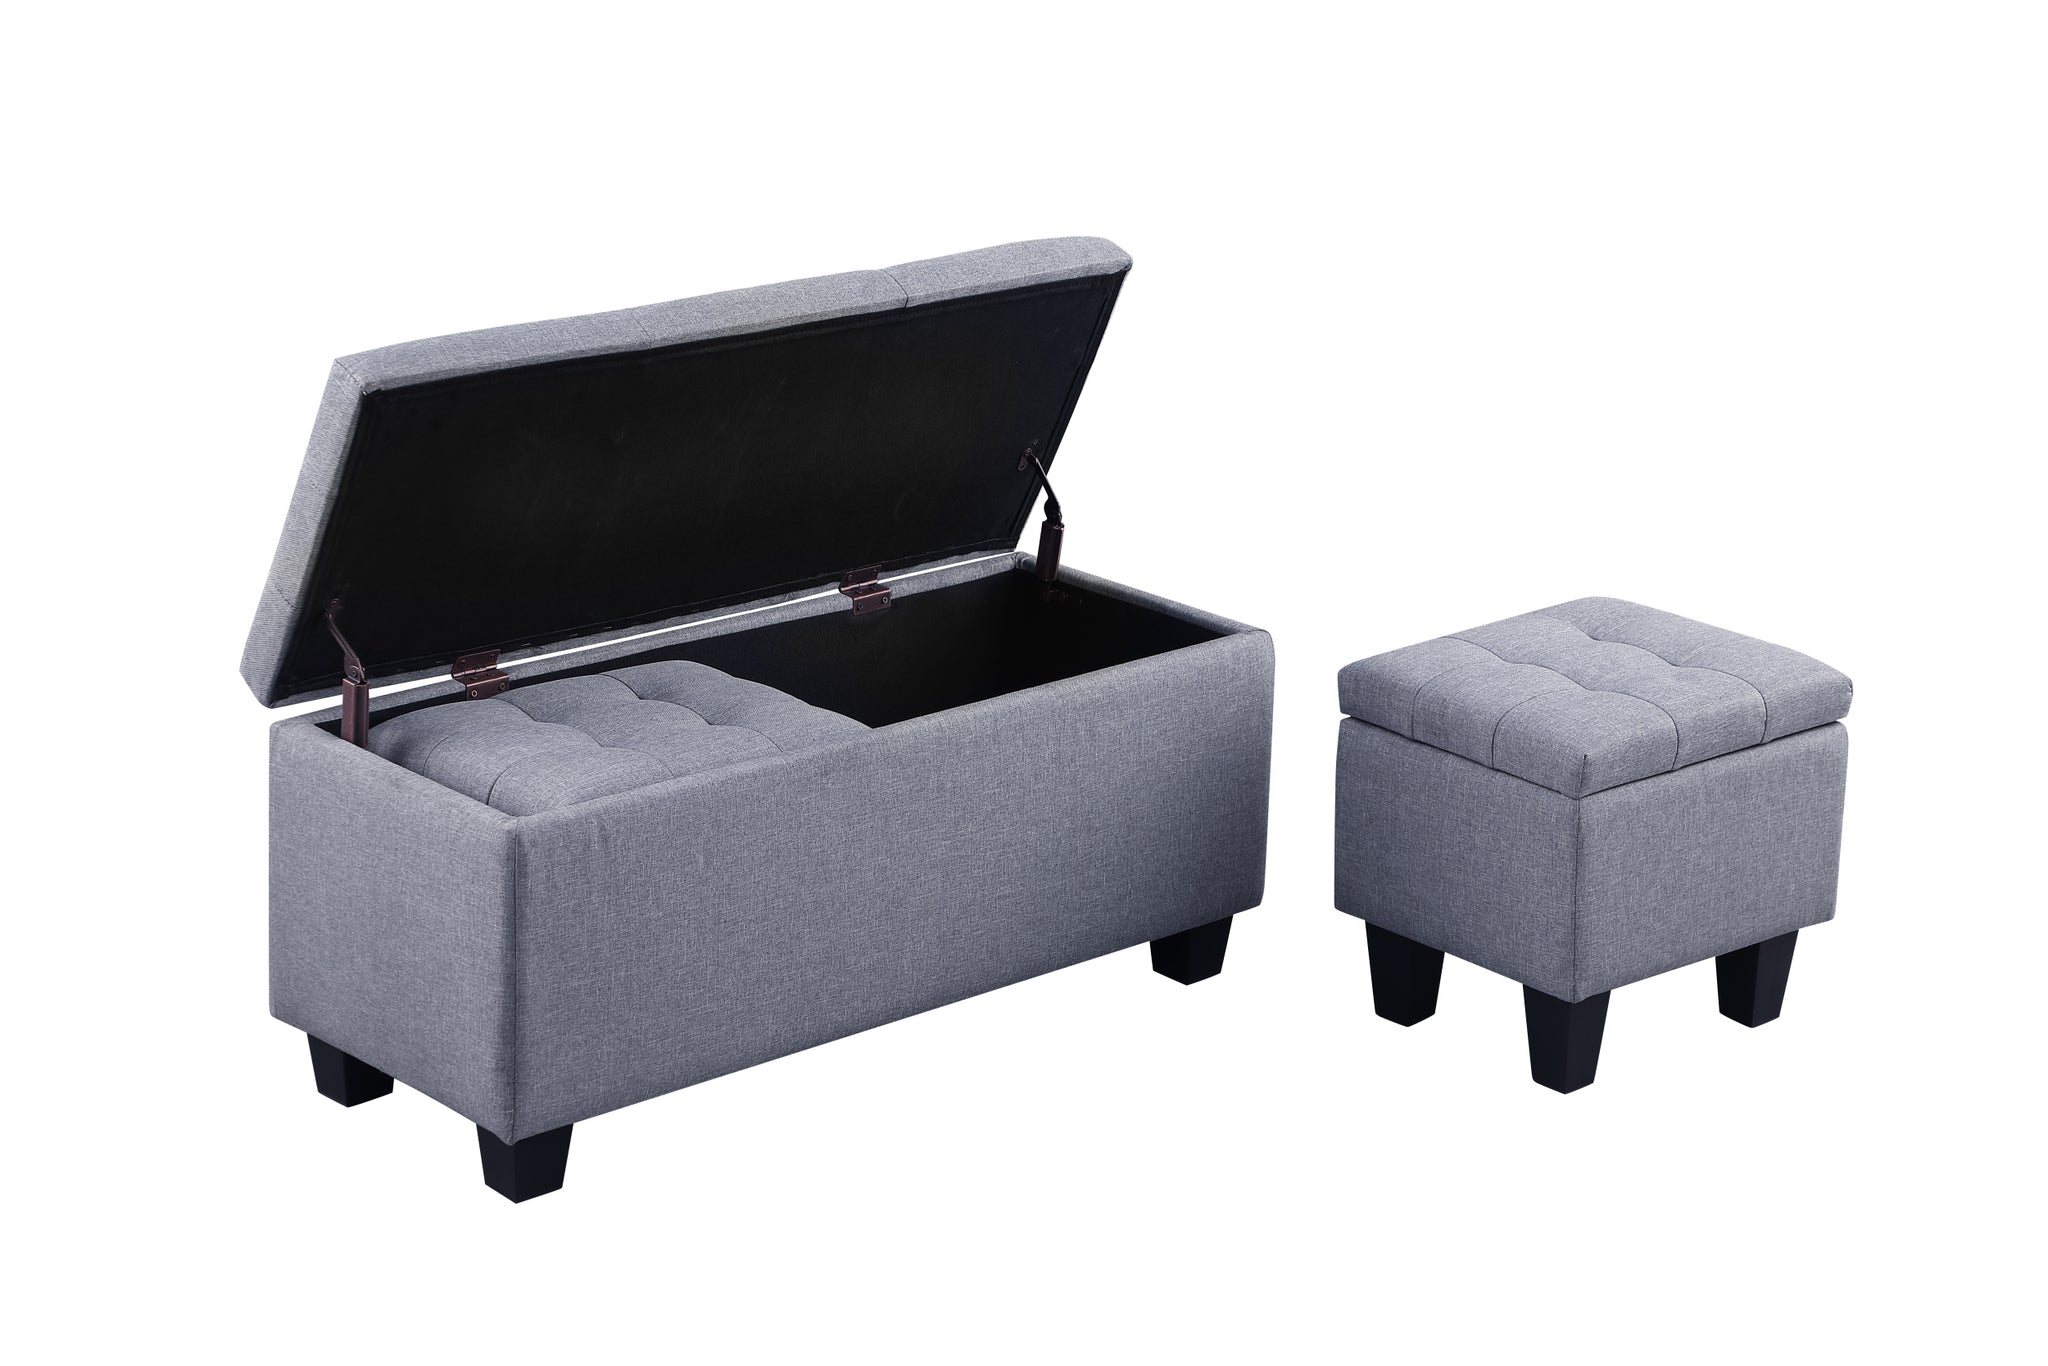 VIDEO Large Storage Ottoman Bench Set, 3 in 1 gray-fabric